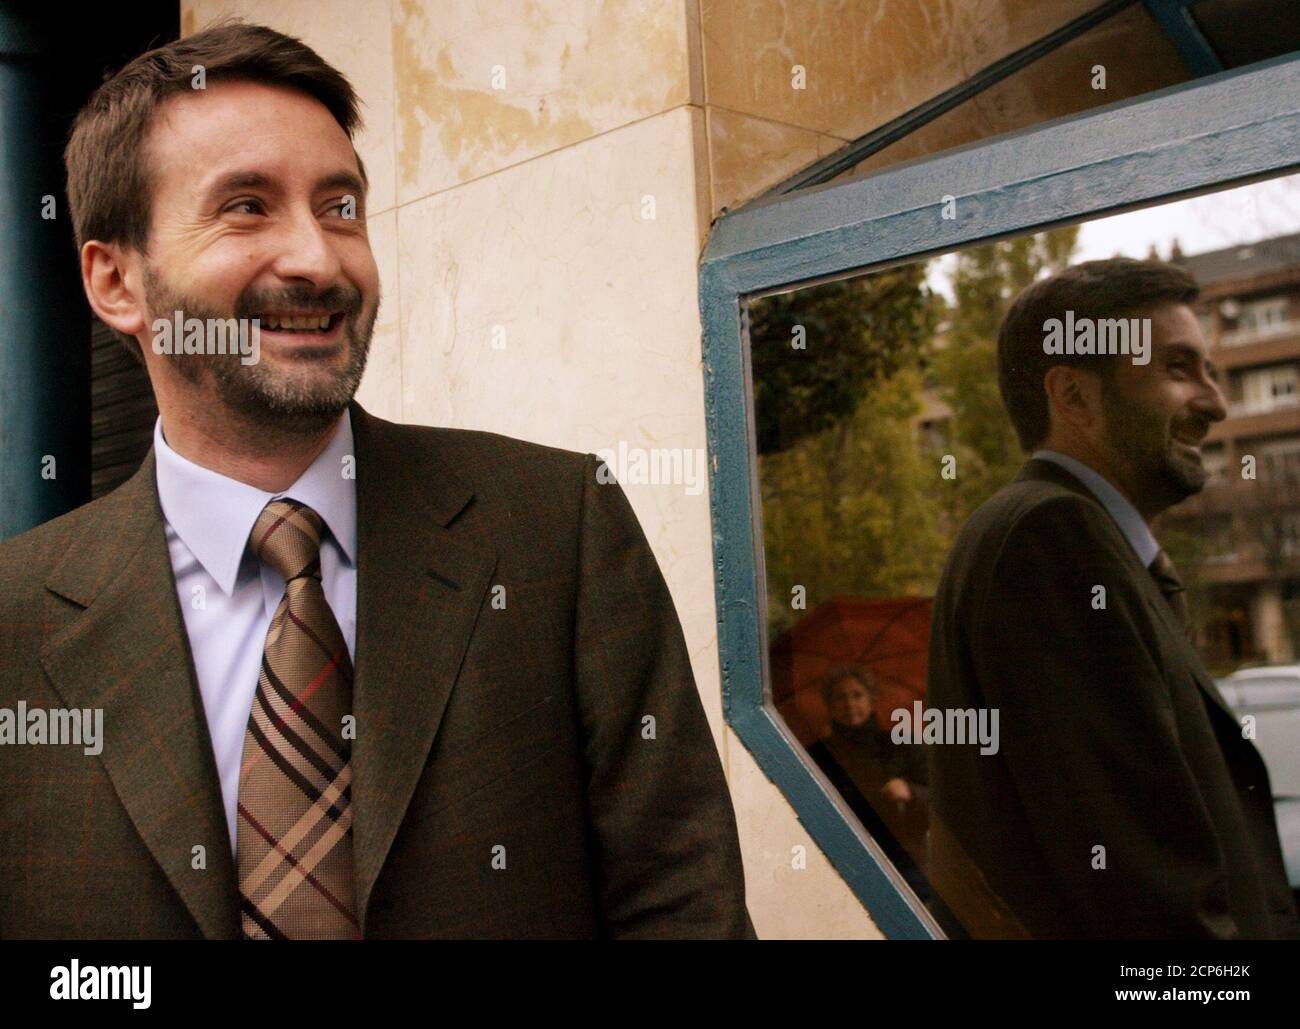 Josu Jon Imaz, spokesman for the Basque regional government and new elected president of ruling nationalist party, the Partido Nacionalista Vasco (PNV) is reflected in a mirror as he arrives for a news conference in Vitoria December 19, 2003. Imaz was elected by PNV's militants as new party leader later December 18, replacing current leader Xavier Arzallus. REUTERS/Vincent West  SP/GB Stock Photo